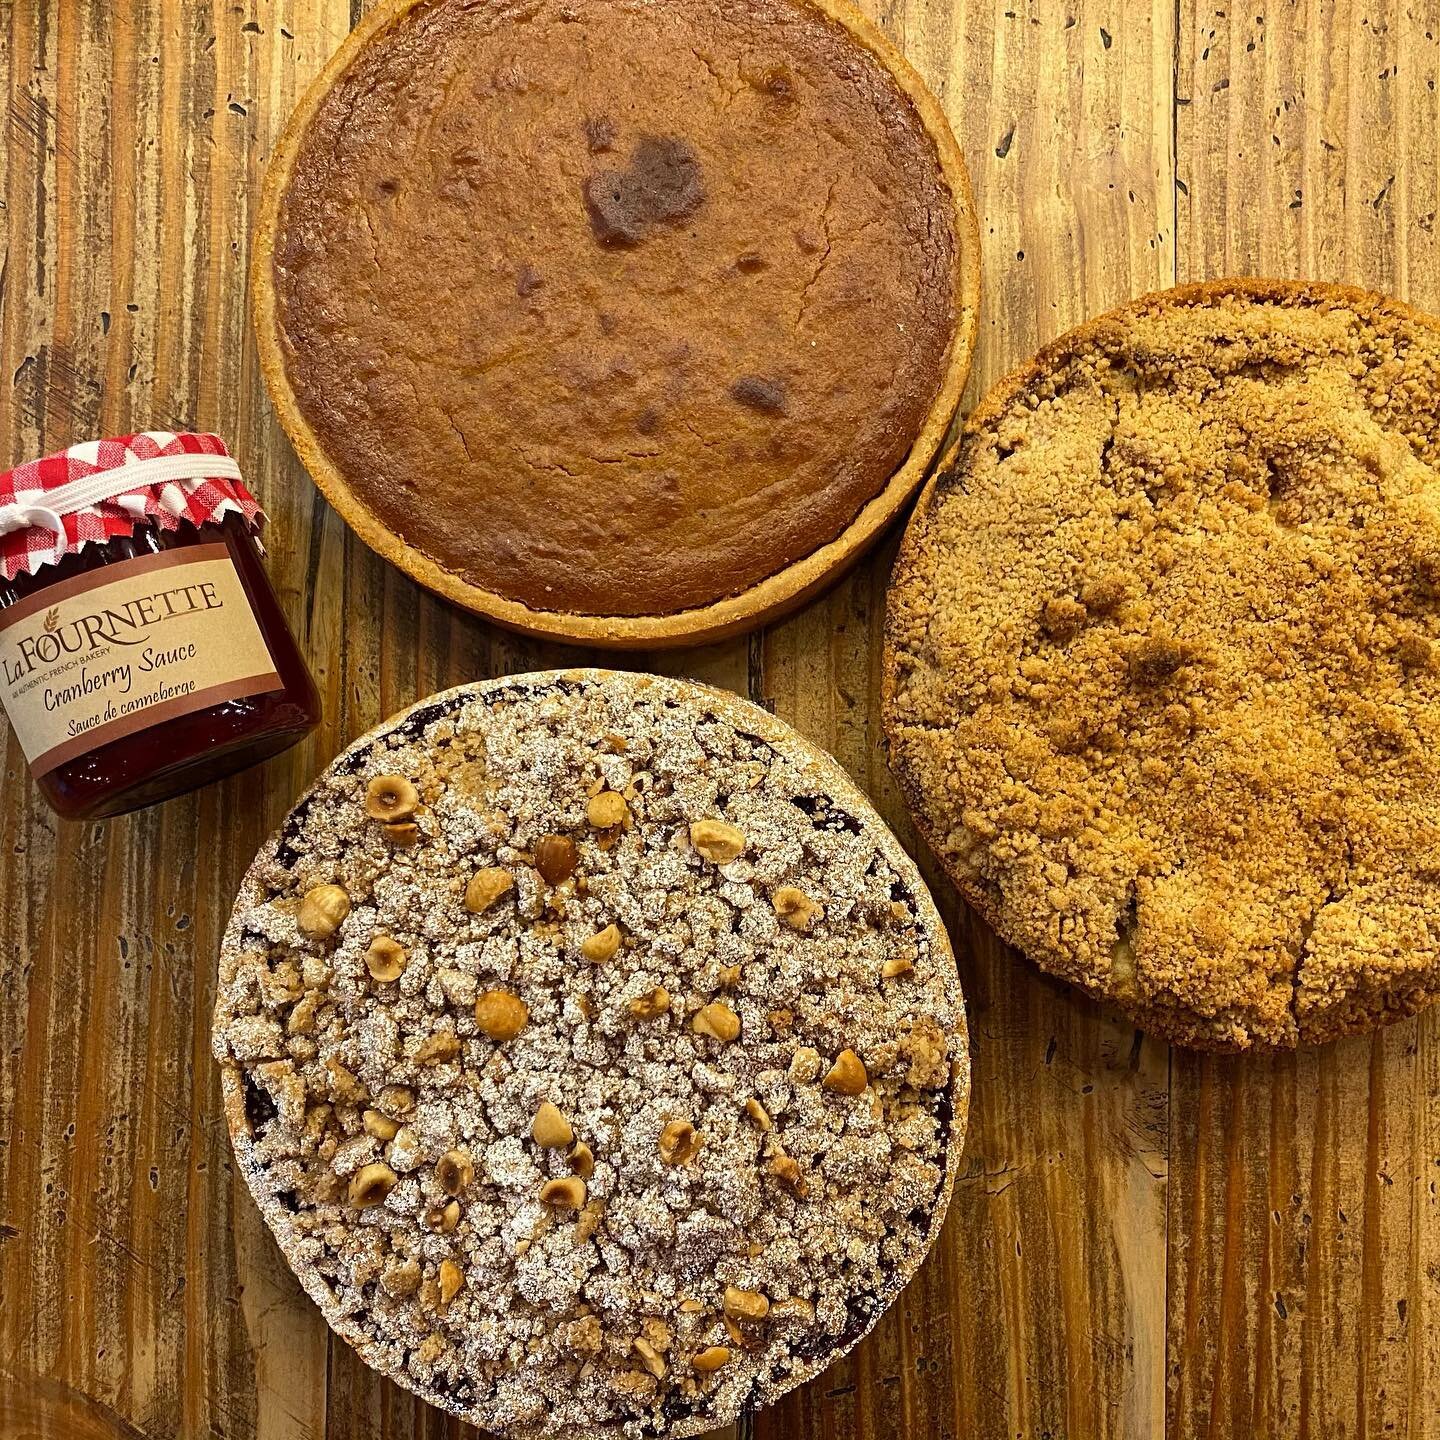 Celebrate Thanksgiving with one of our three pies! Apple and cranberries, Michigan cherries and buttery almond cream, or pumpkin pie. We also have cranberry sauce and dinner rolls to complement your dinner. We will be open regular hours Wednesday and